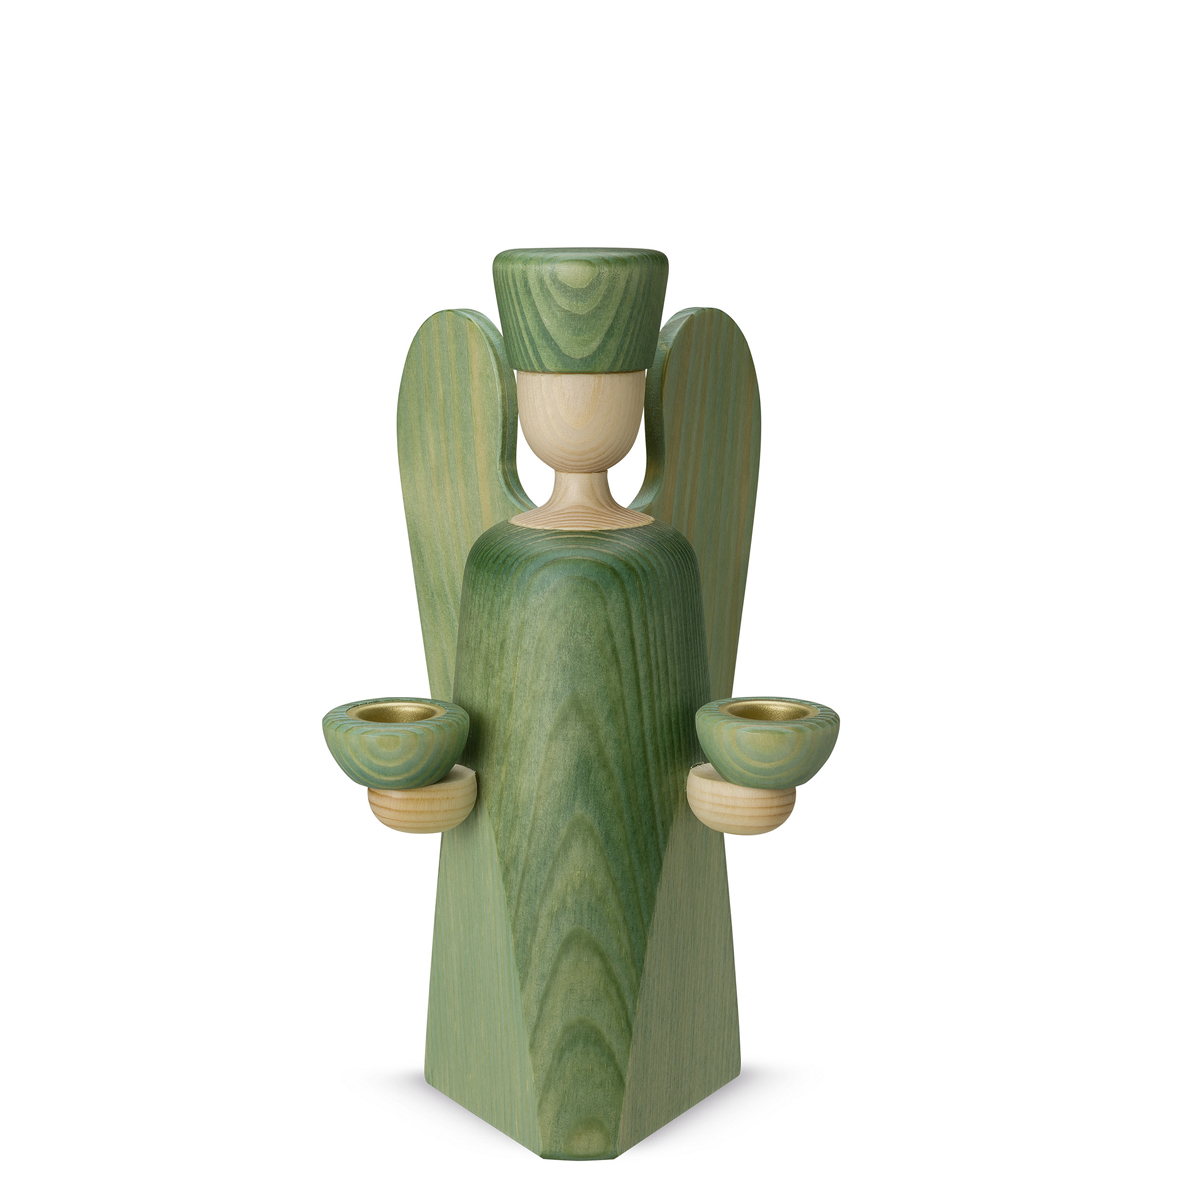 Angel candle holder, small, green